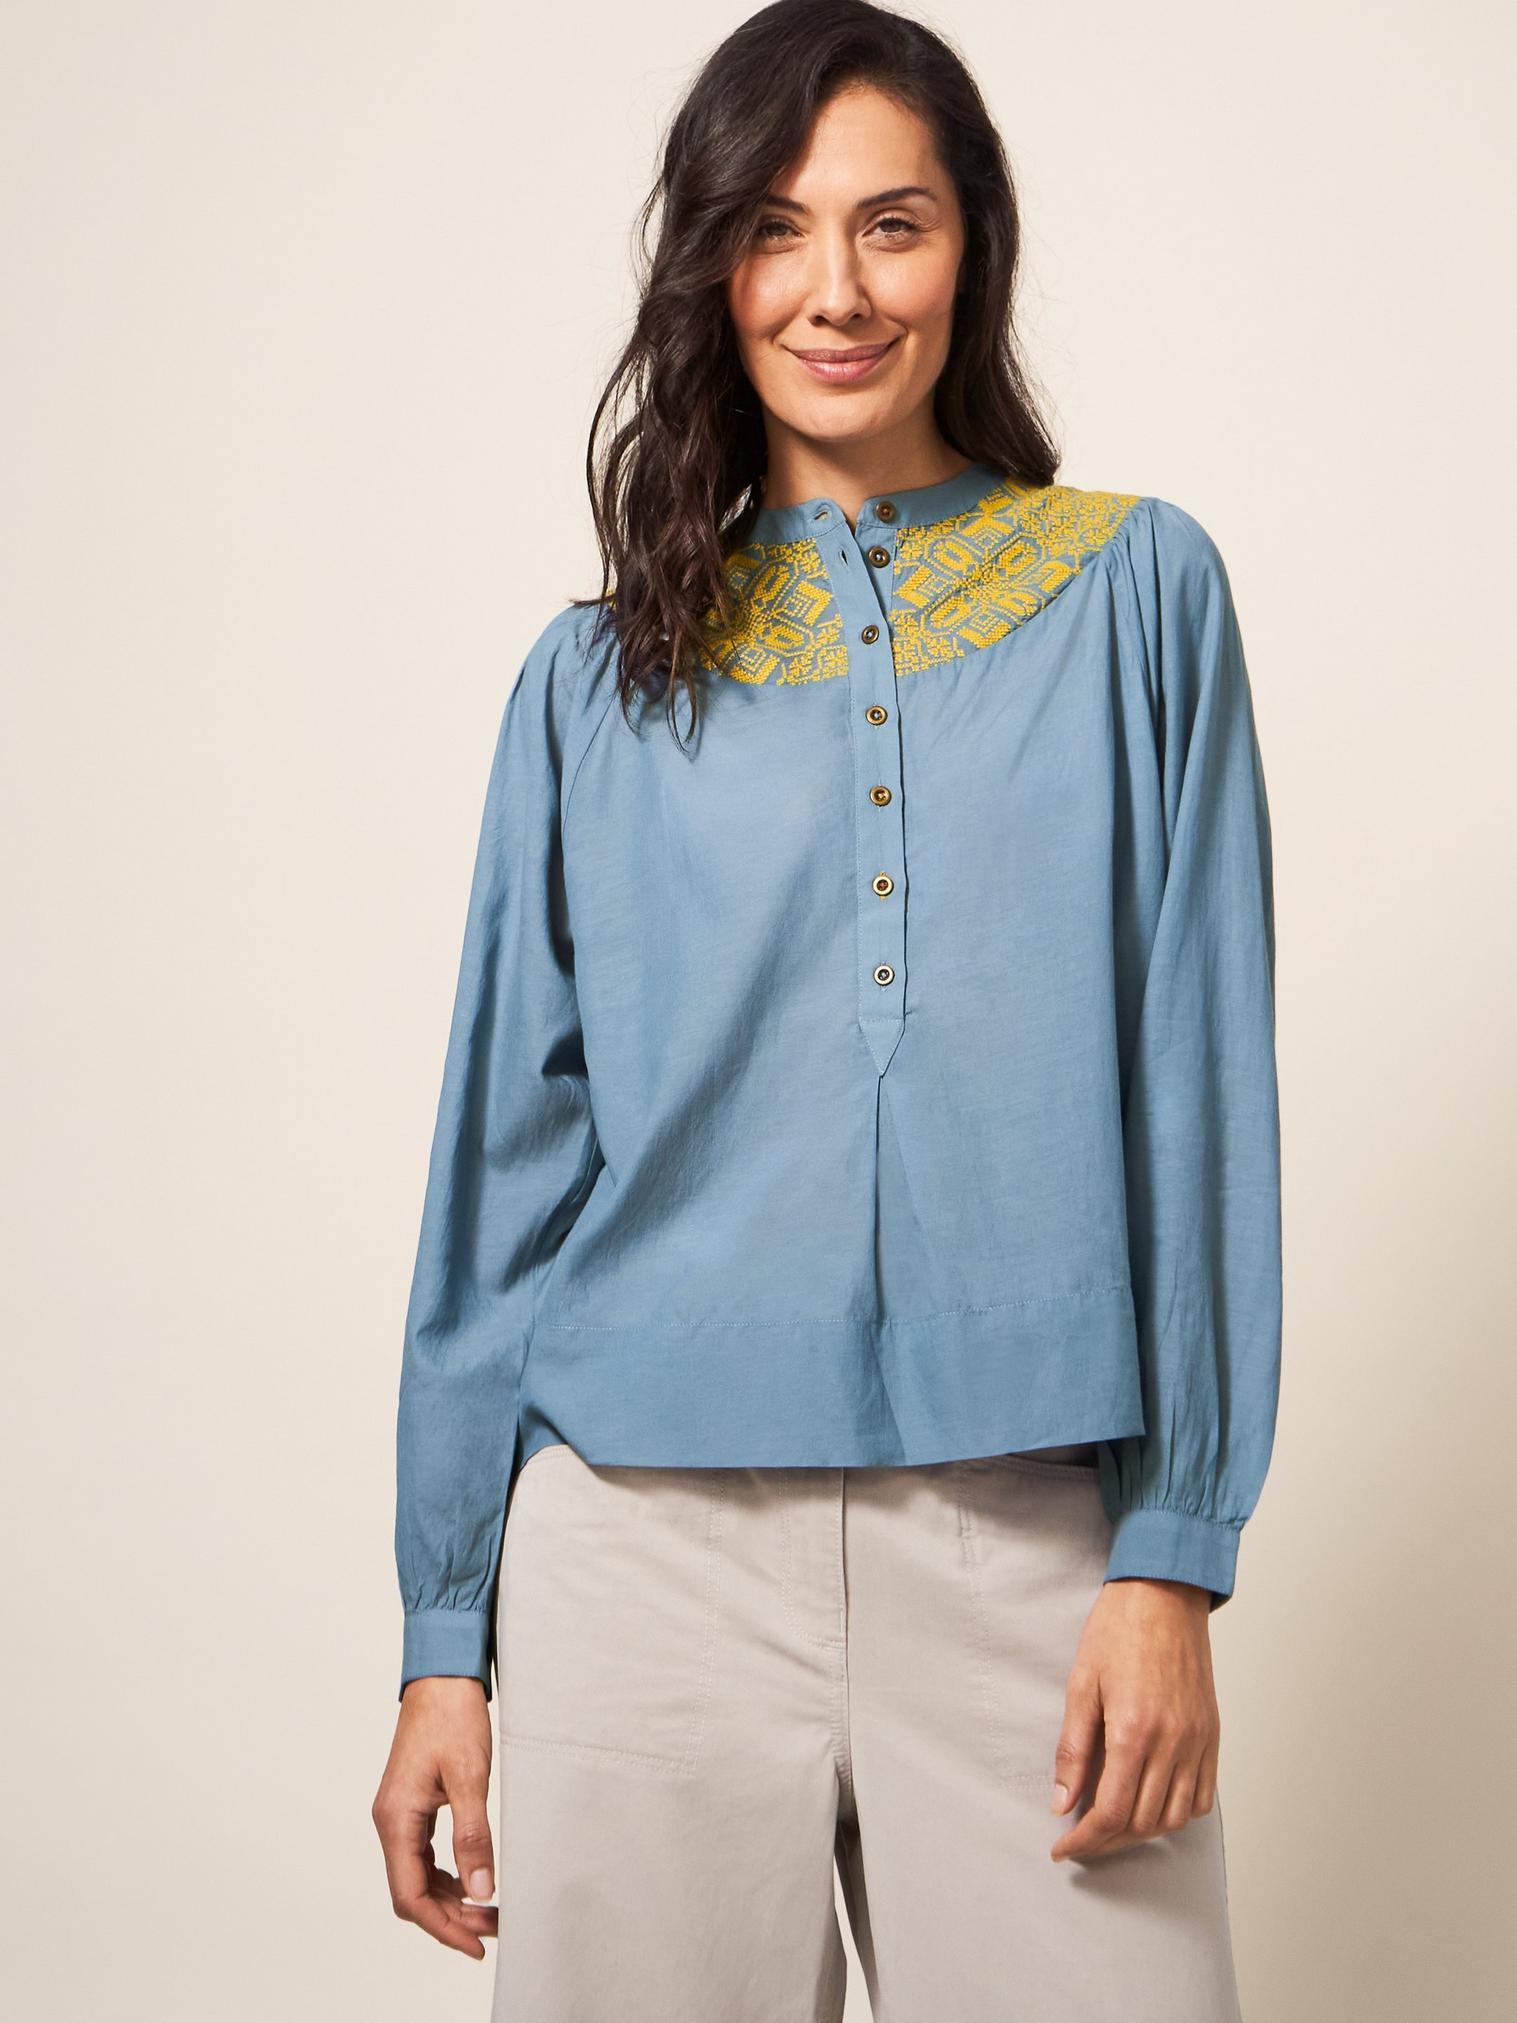 ROSE EMBROIDERED TOP in BLUE MLT - LIFESTYLE